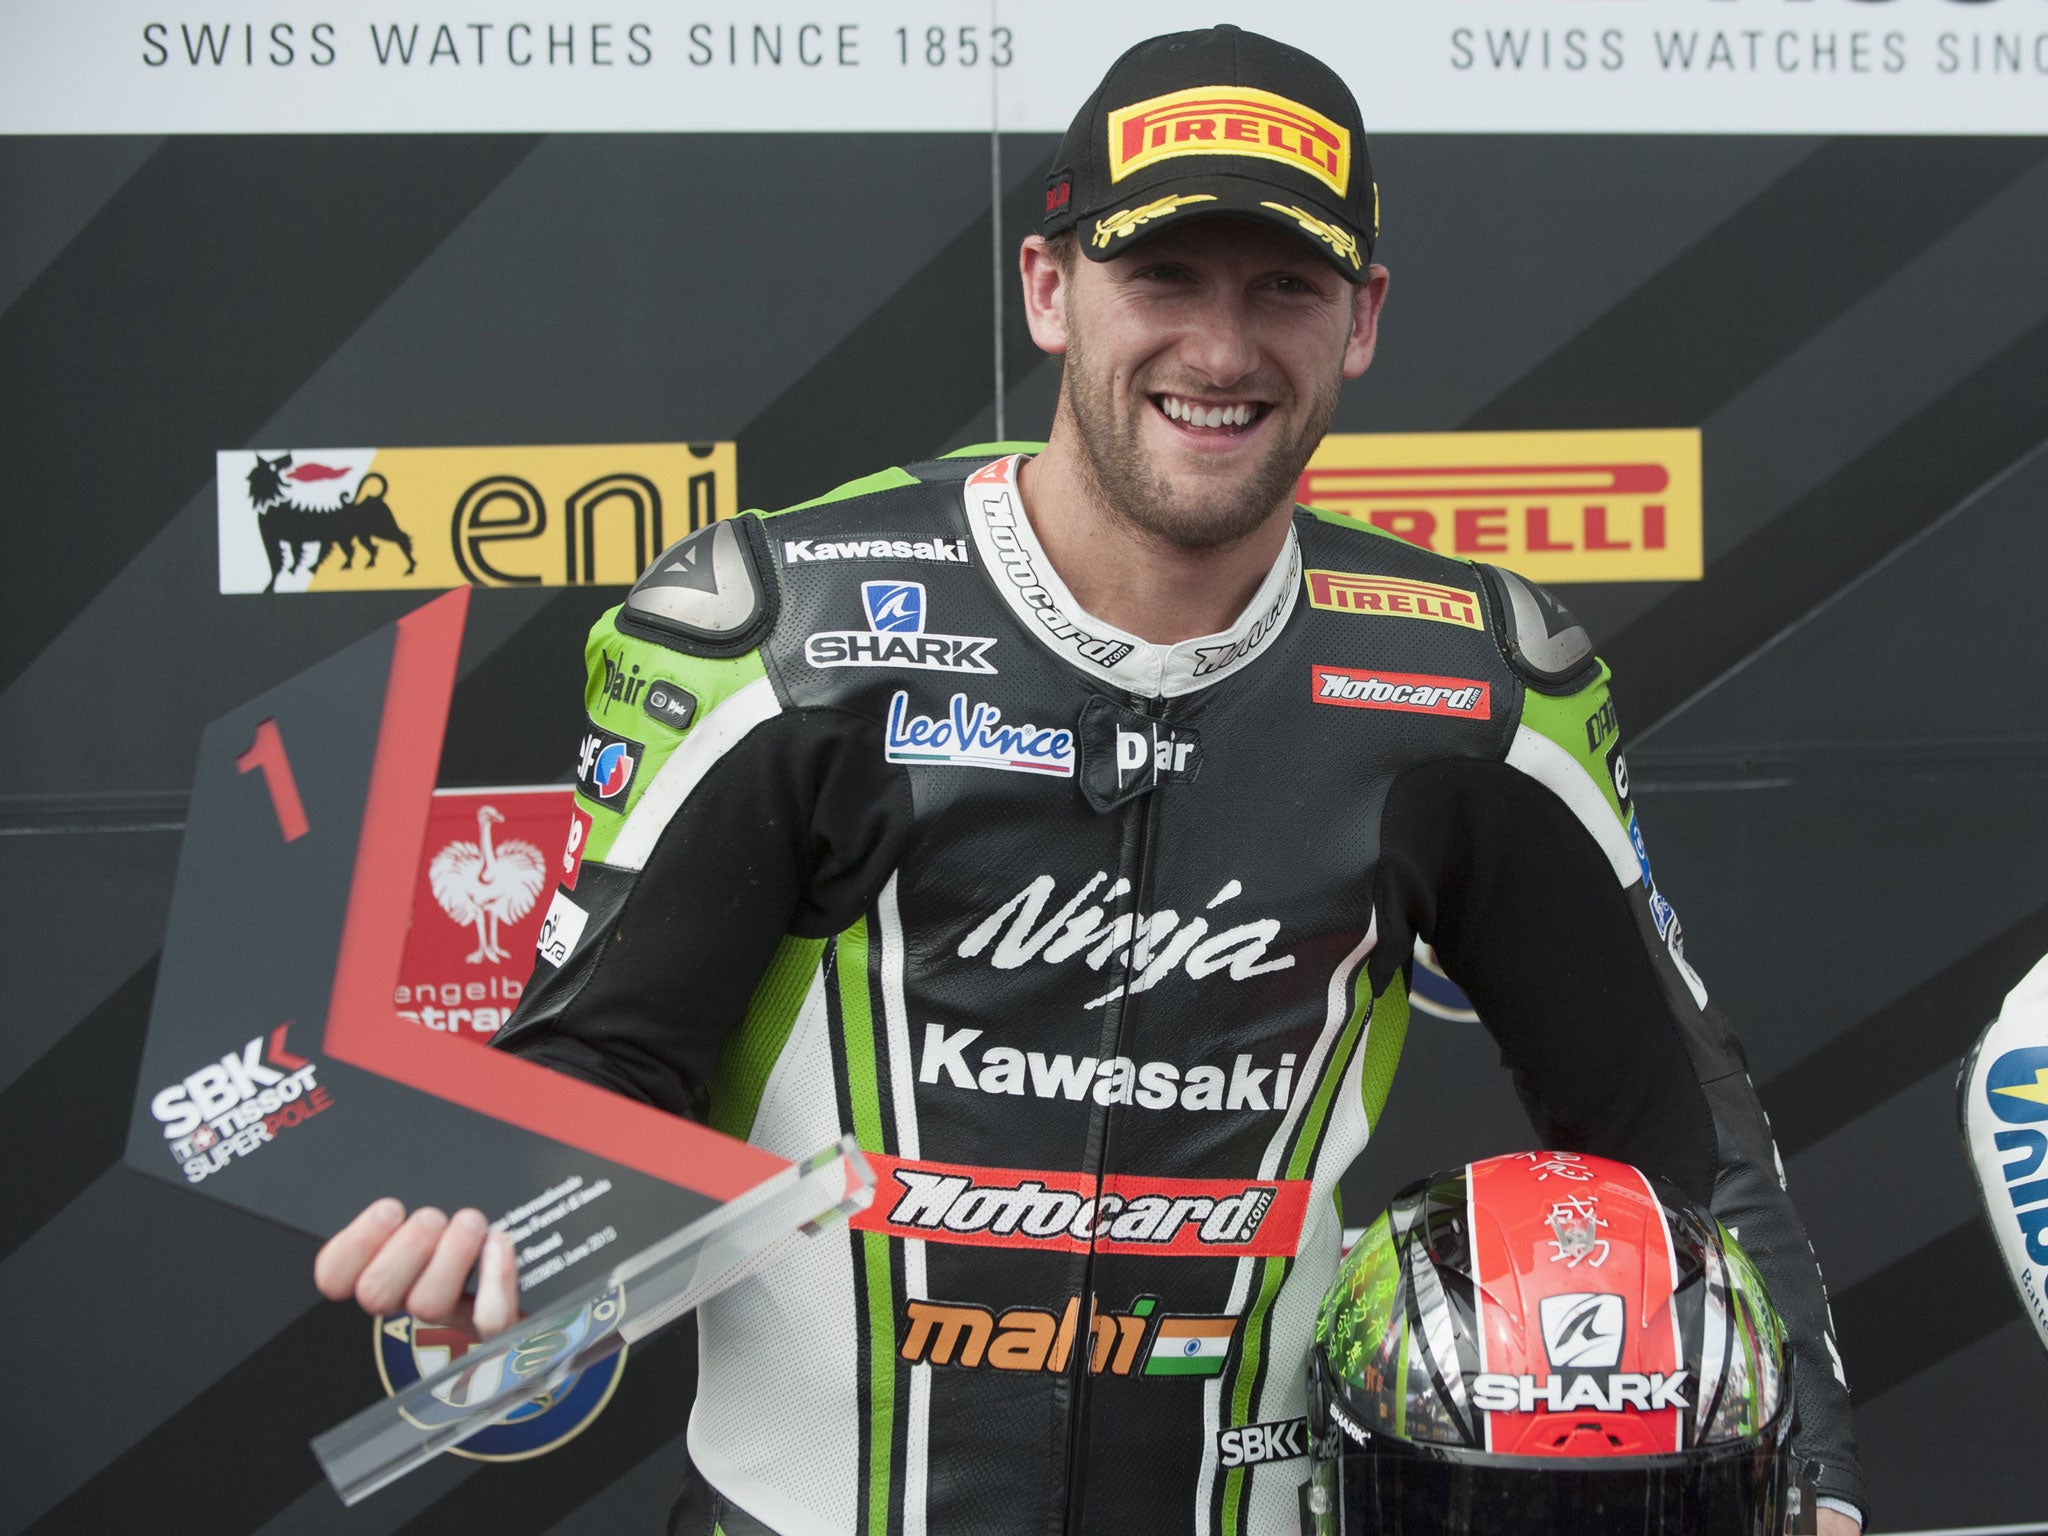 Tom Sykes took over at the top of the World Superbike Championship standings after winning both races at Imola